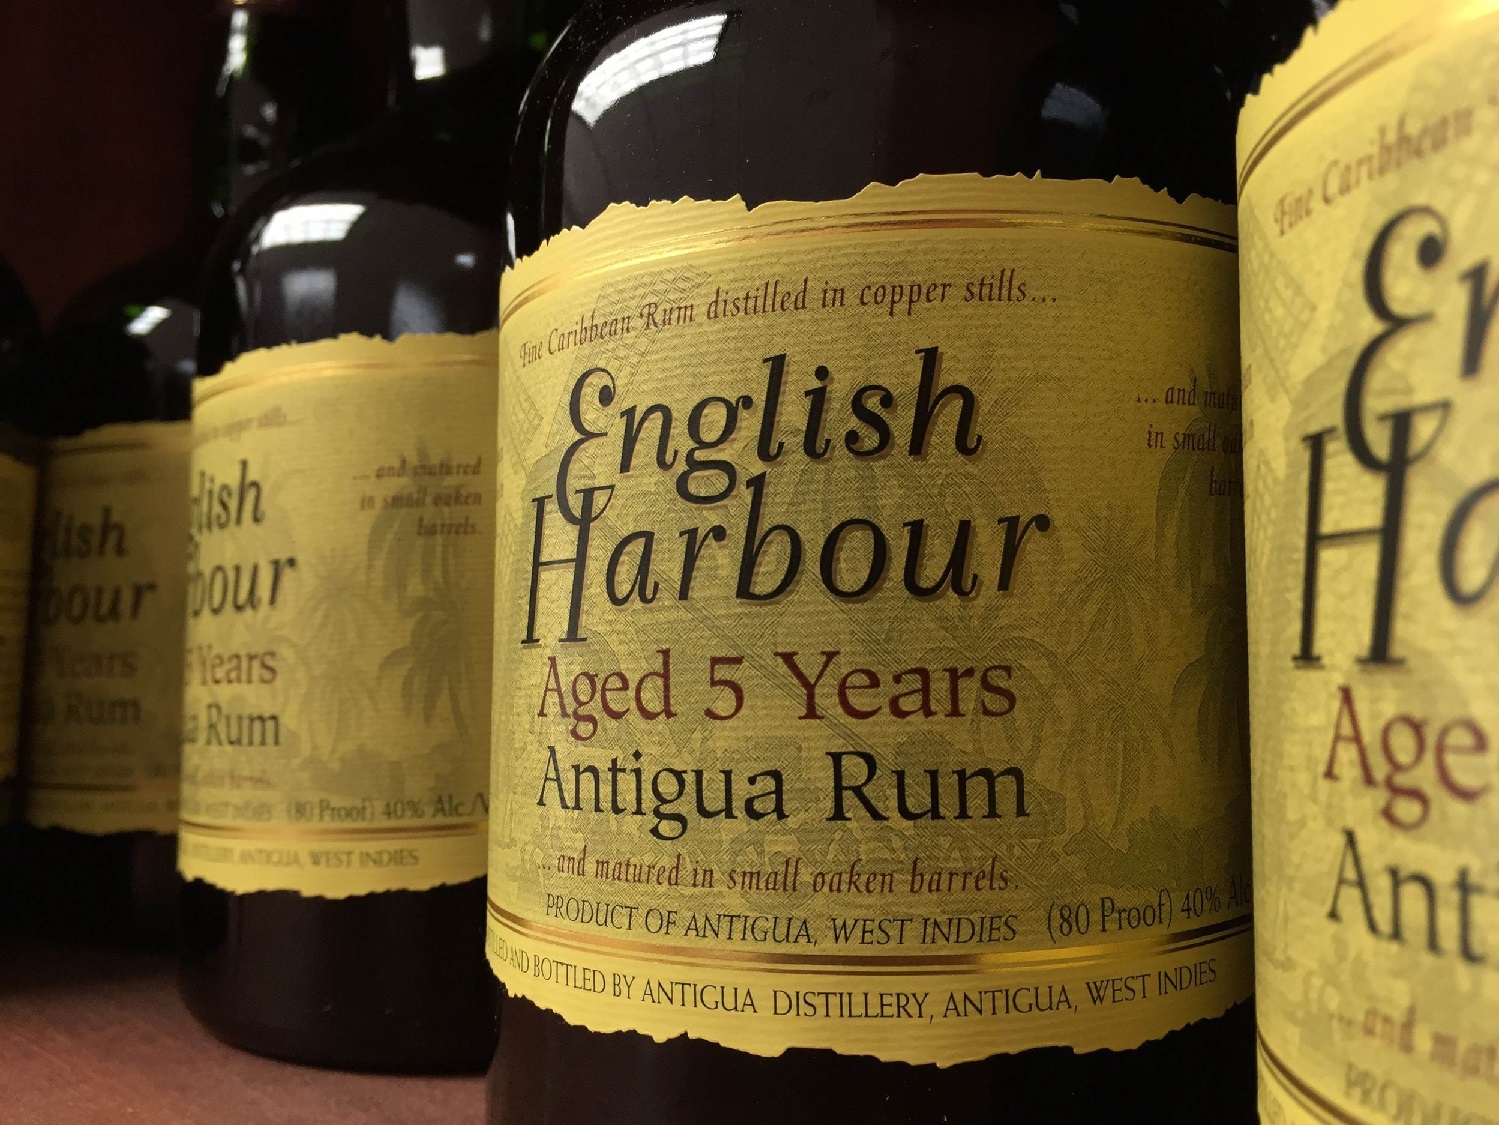 Zig Zag wins a case of English Harbour 5 Year Old Rum.